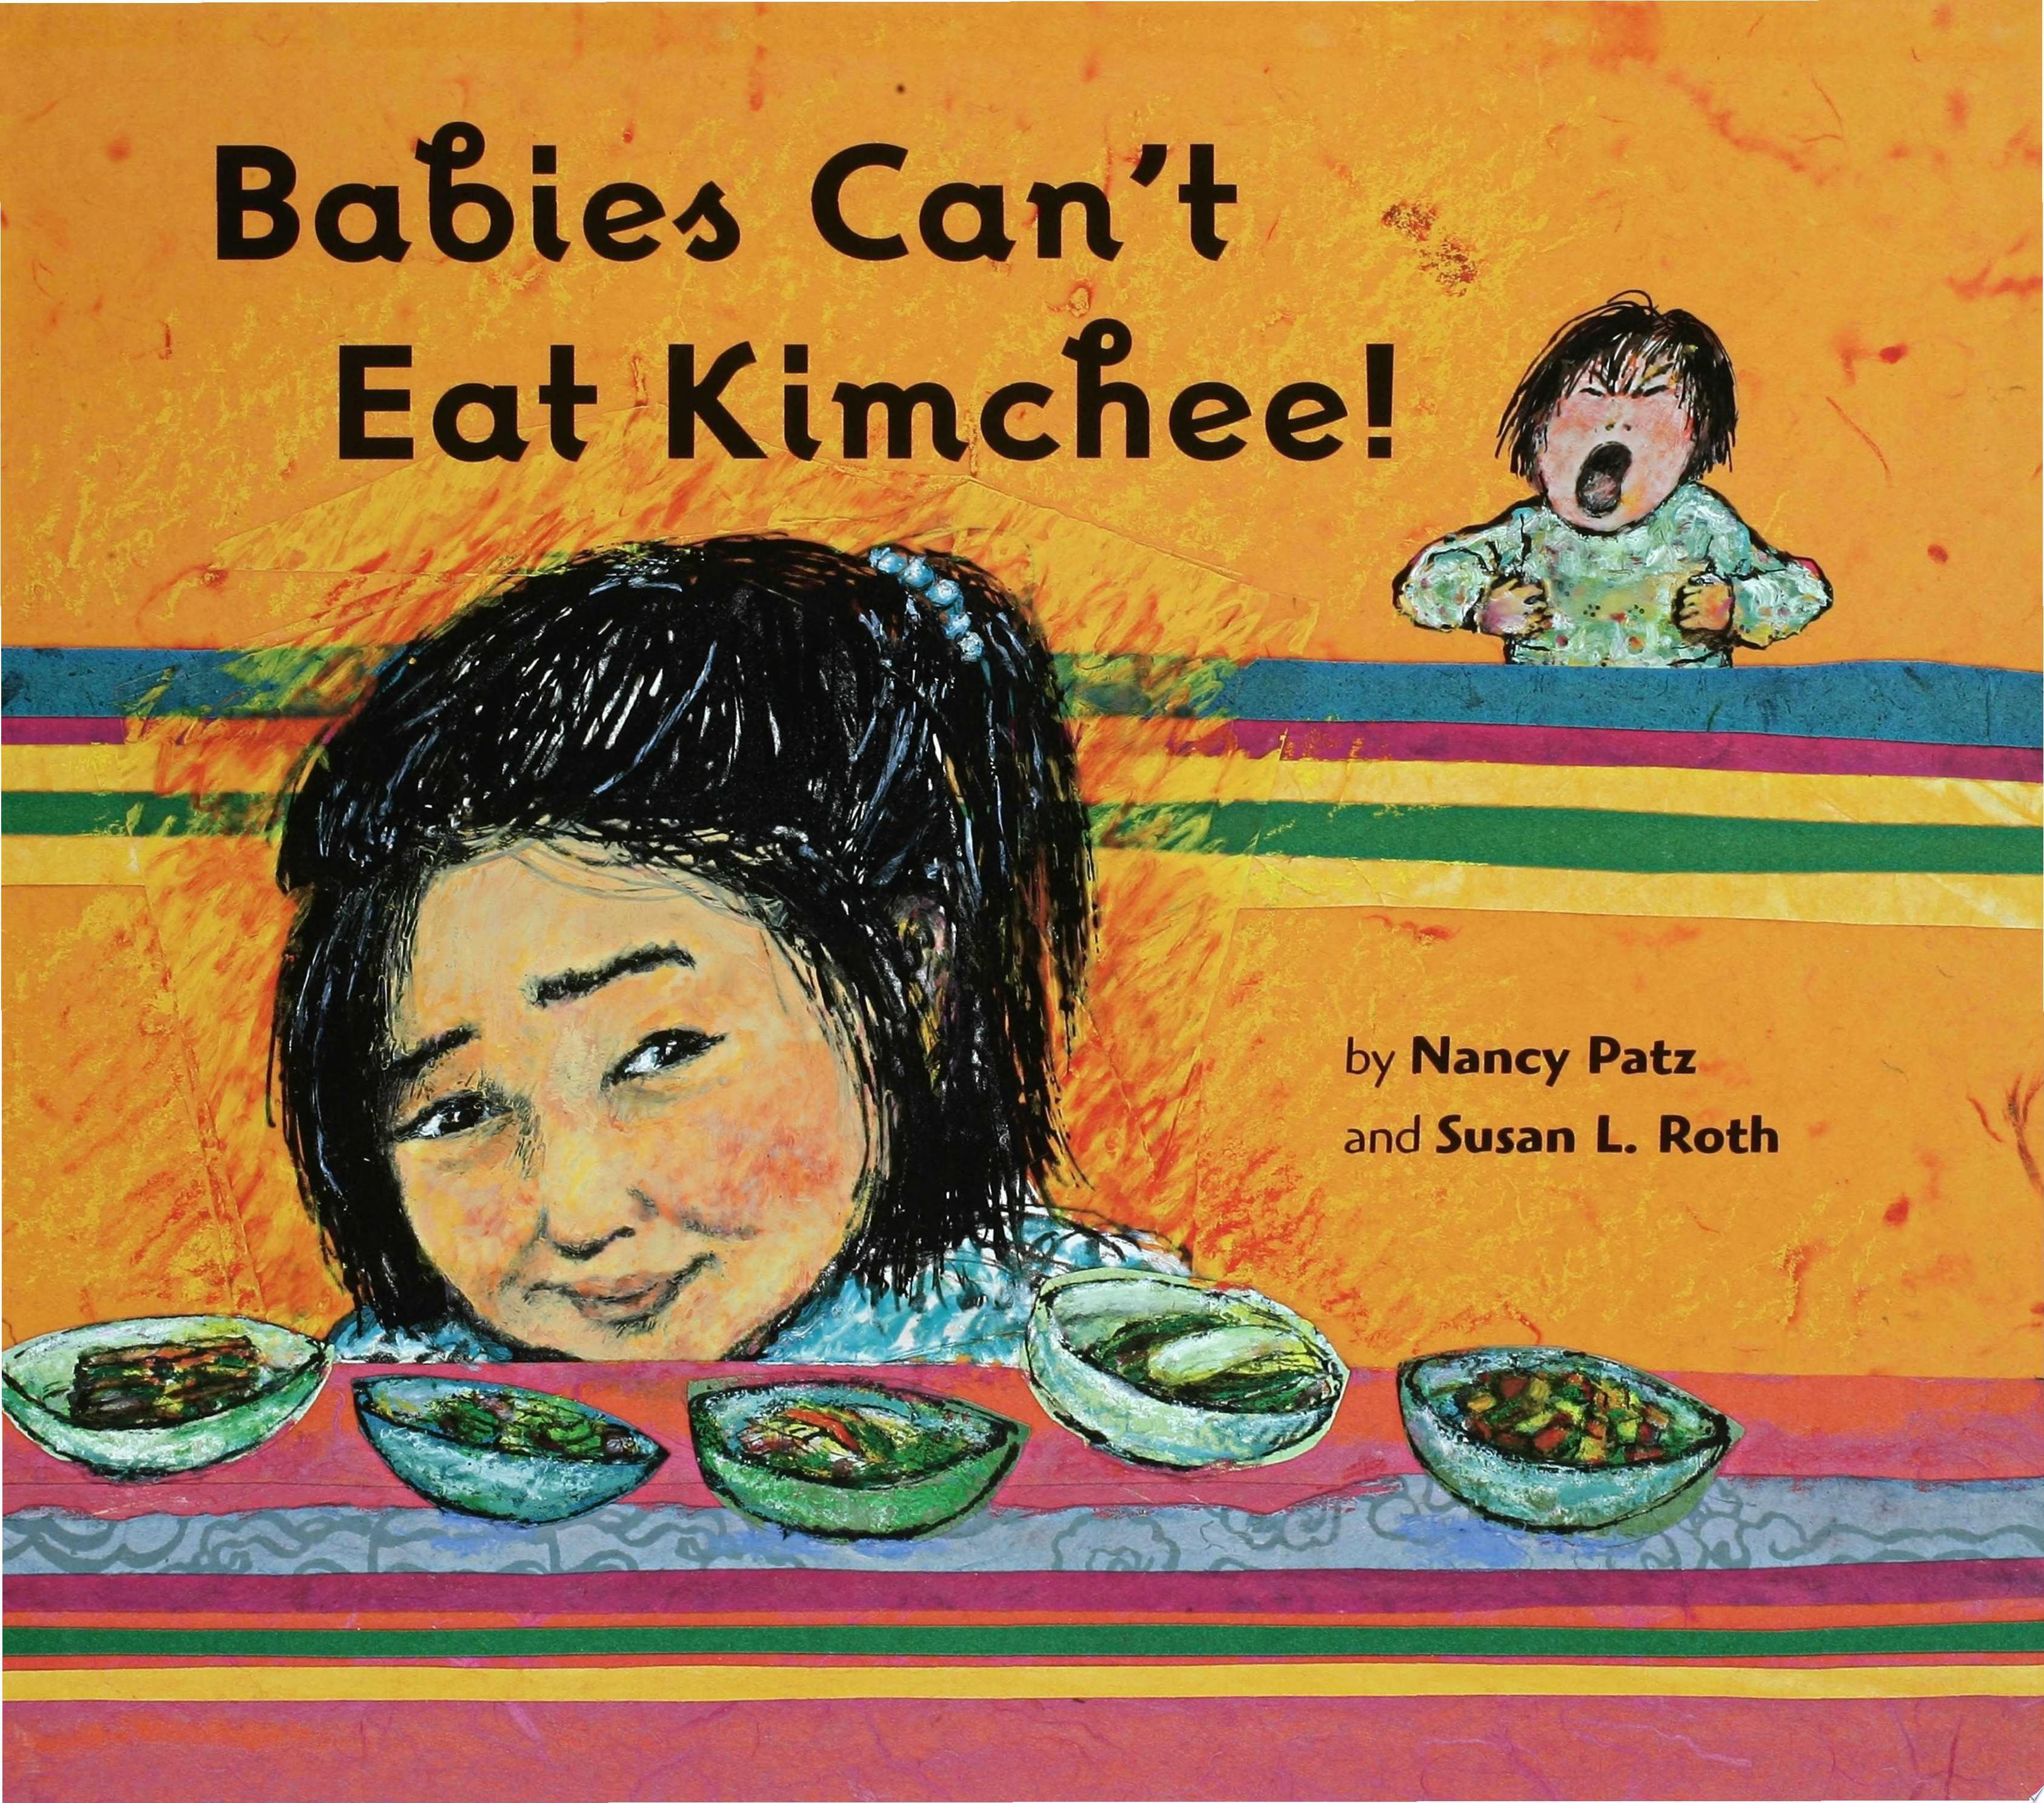 Image for "Babies Can't Eat Kimchee!"